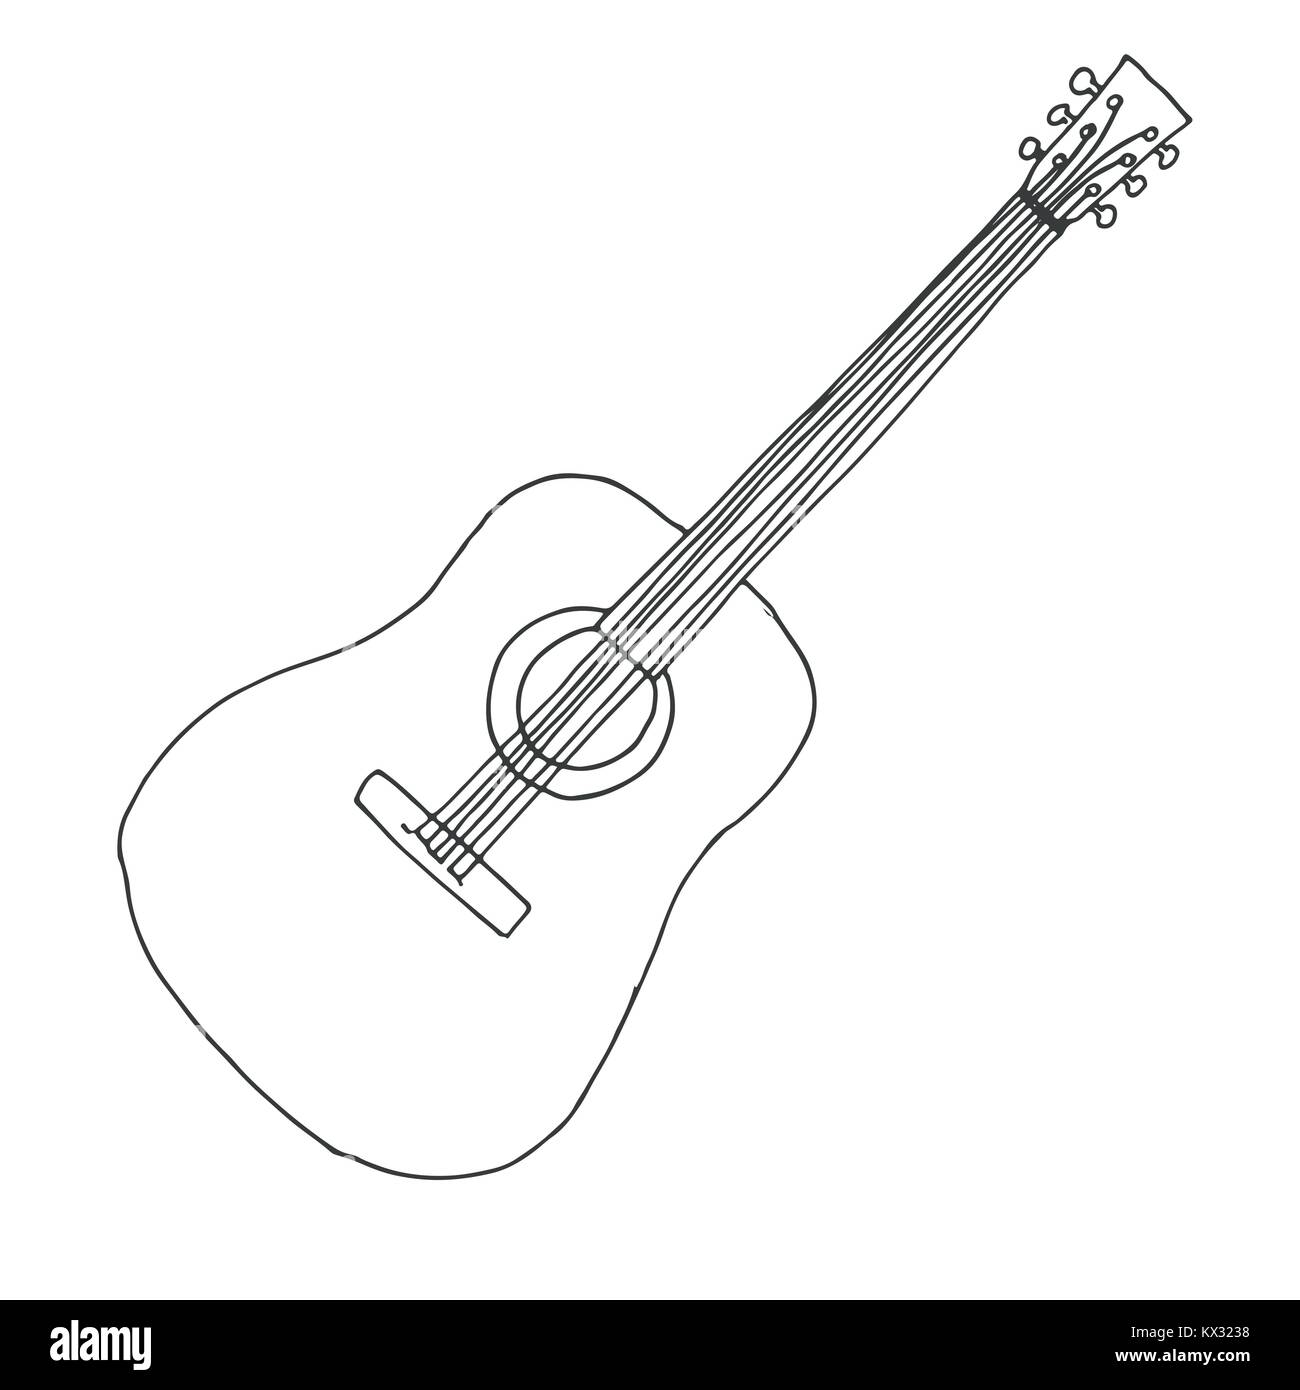 Sketch of a guitar. Vector illustration. Acoustic guitar isolated on white background. Stock Vector